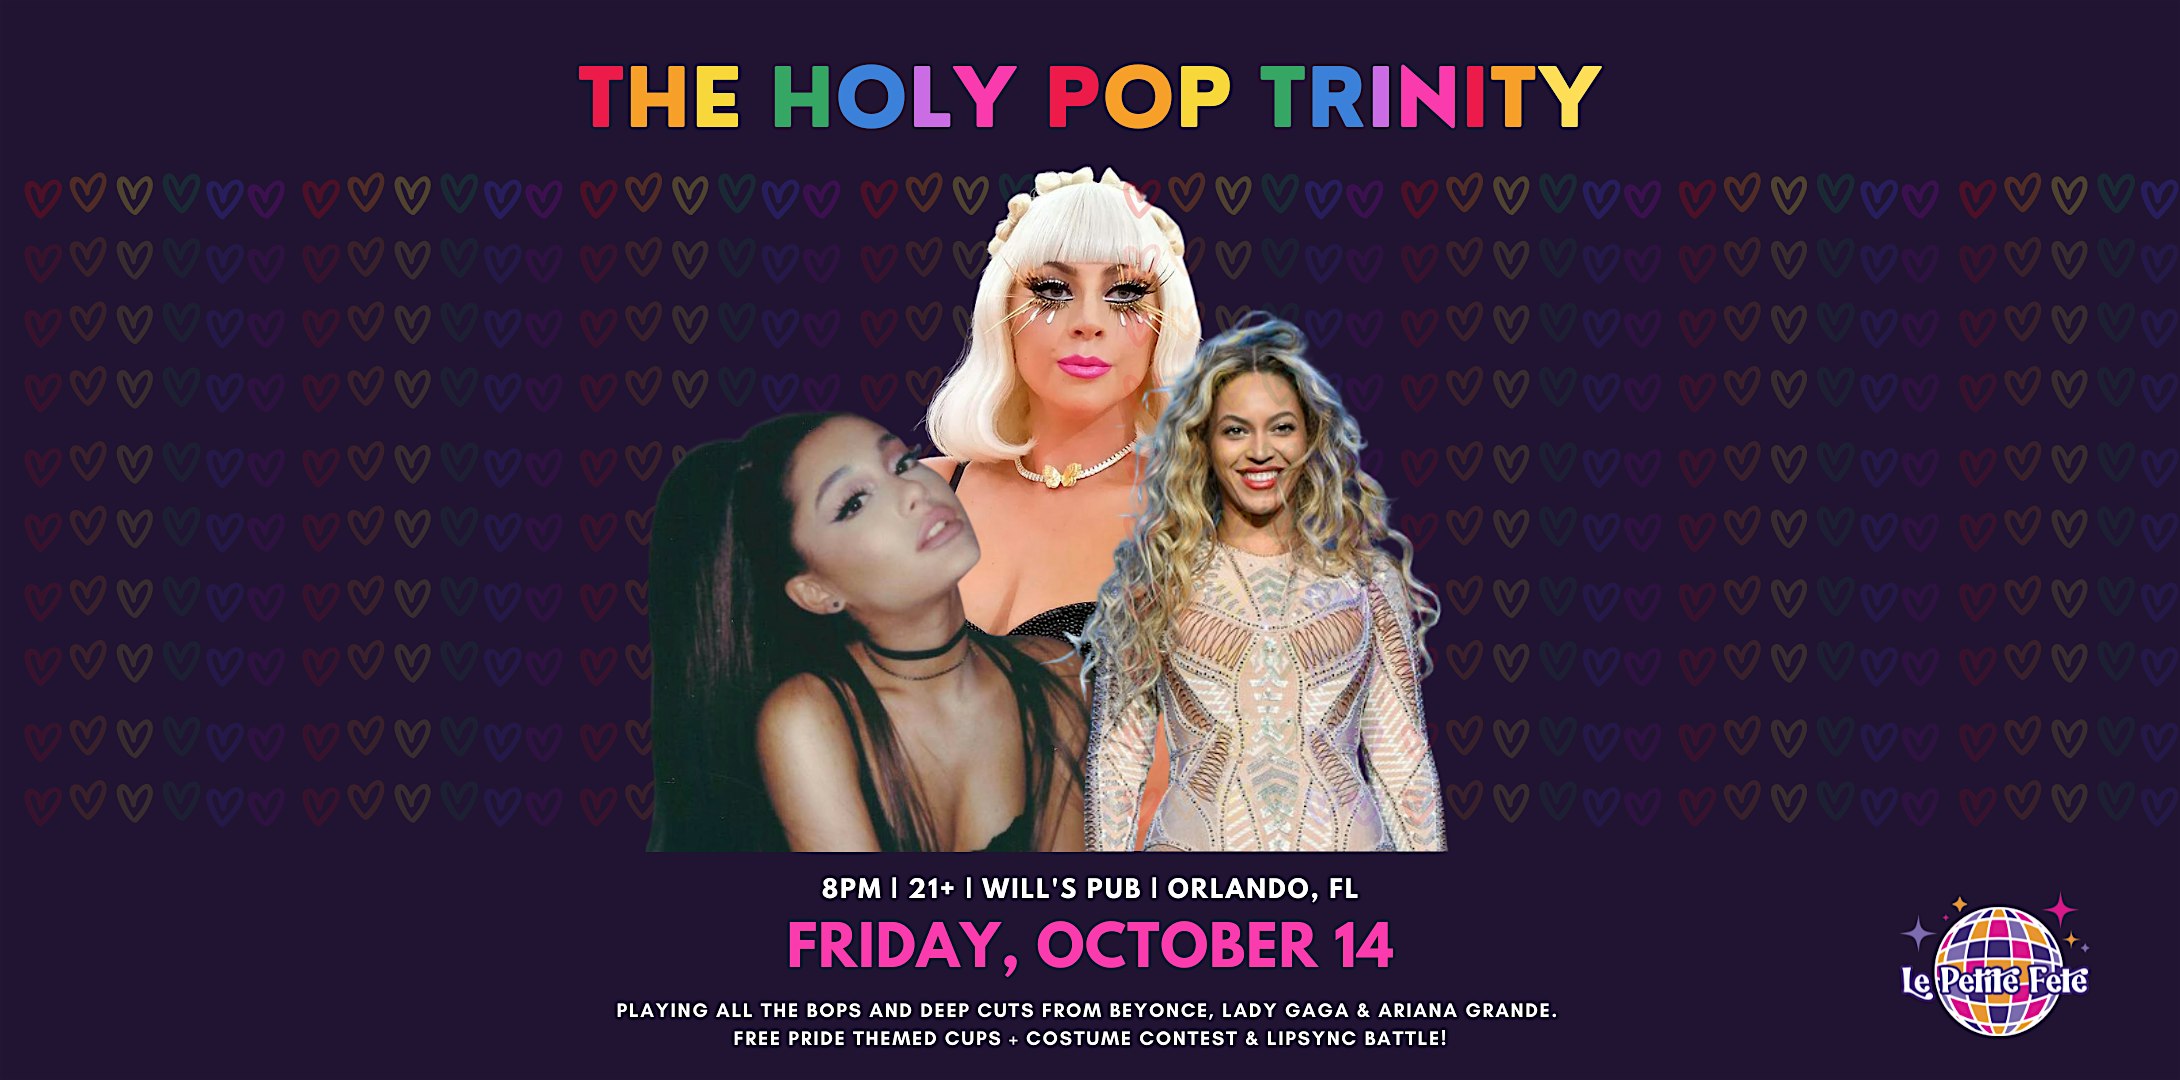 The Holy Pop Trinity Dance Night in Orlando at Will's Pub